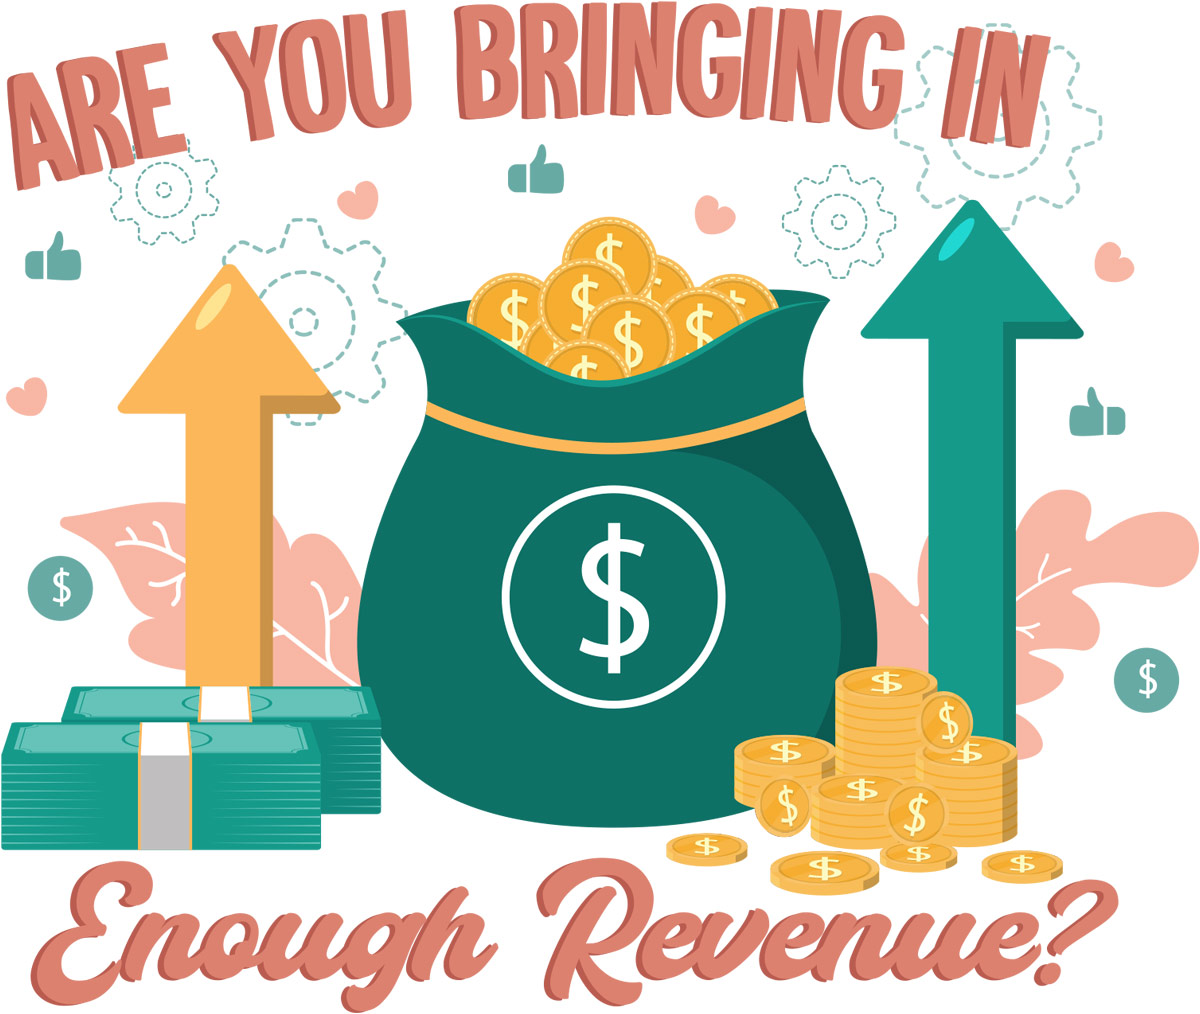 Are You Bringing in Enough Revenue? article graphic